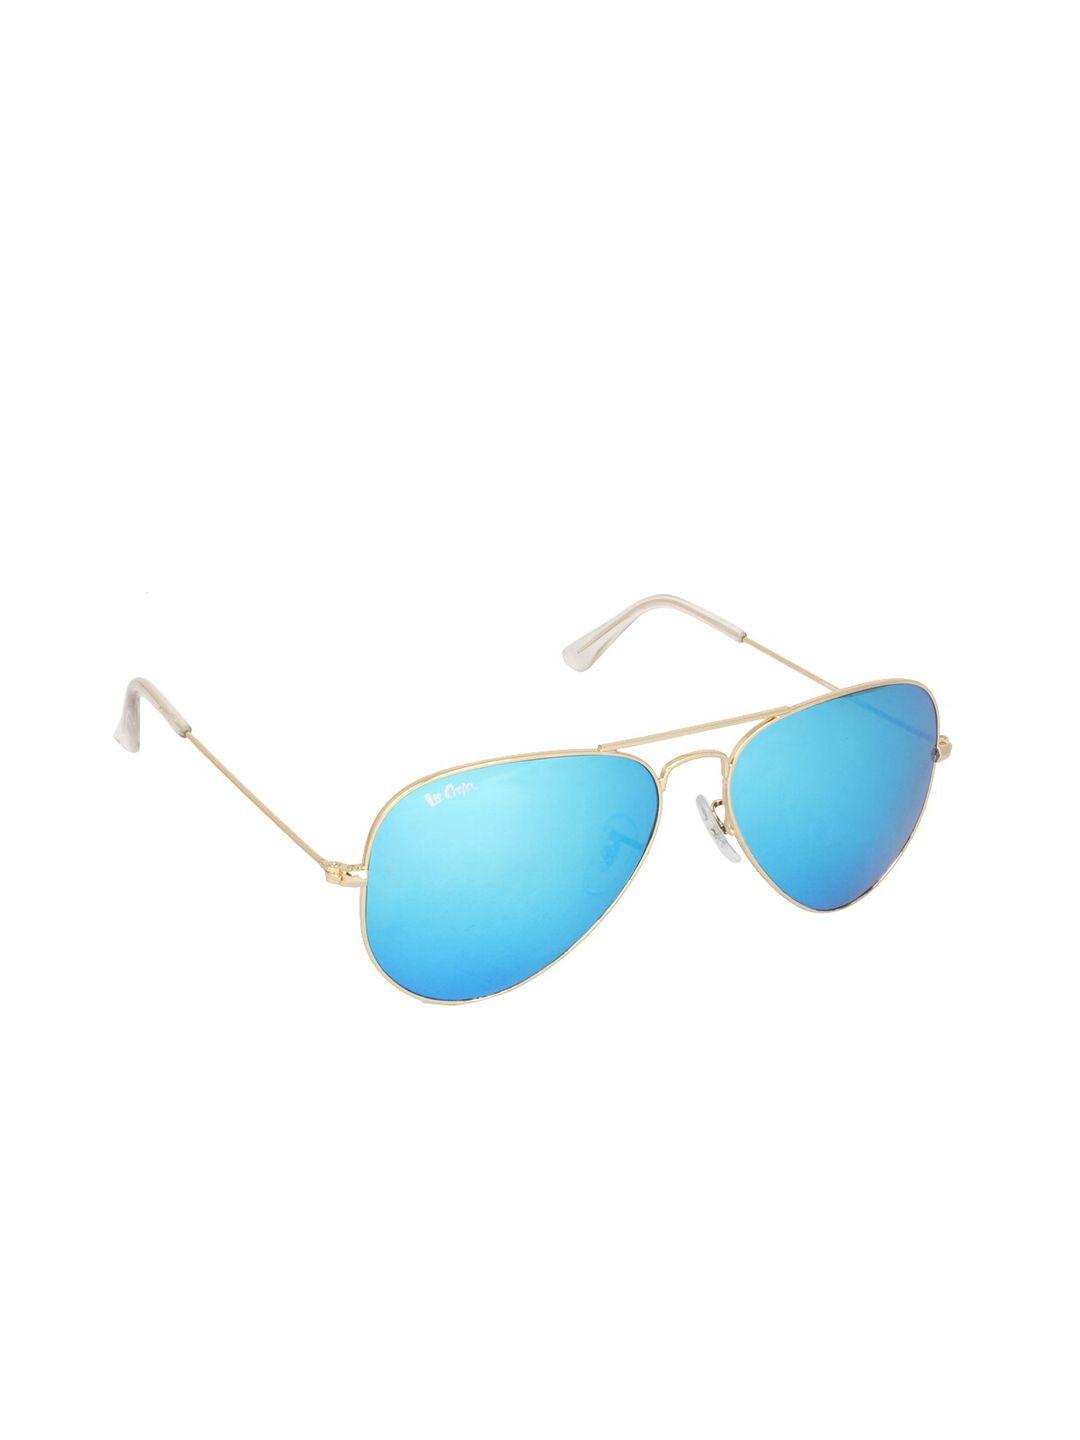 lee cooper unisex blue lens & gold-toned aviator sunglasses with uv protected lens